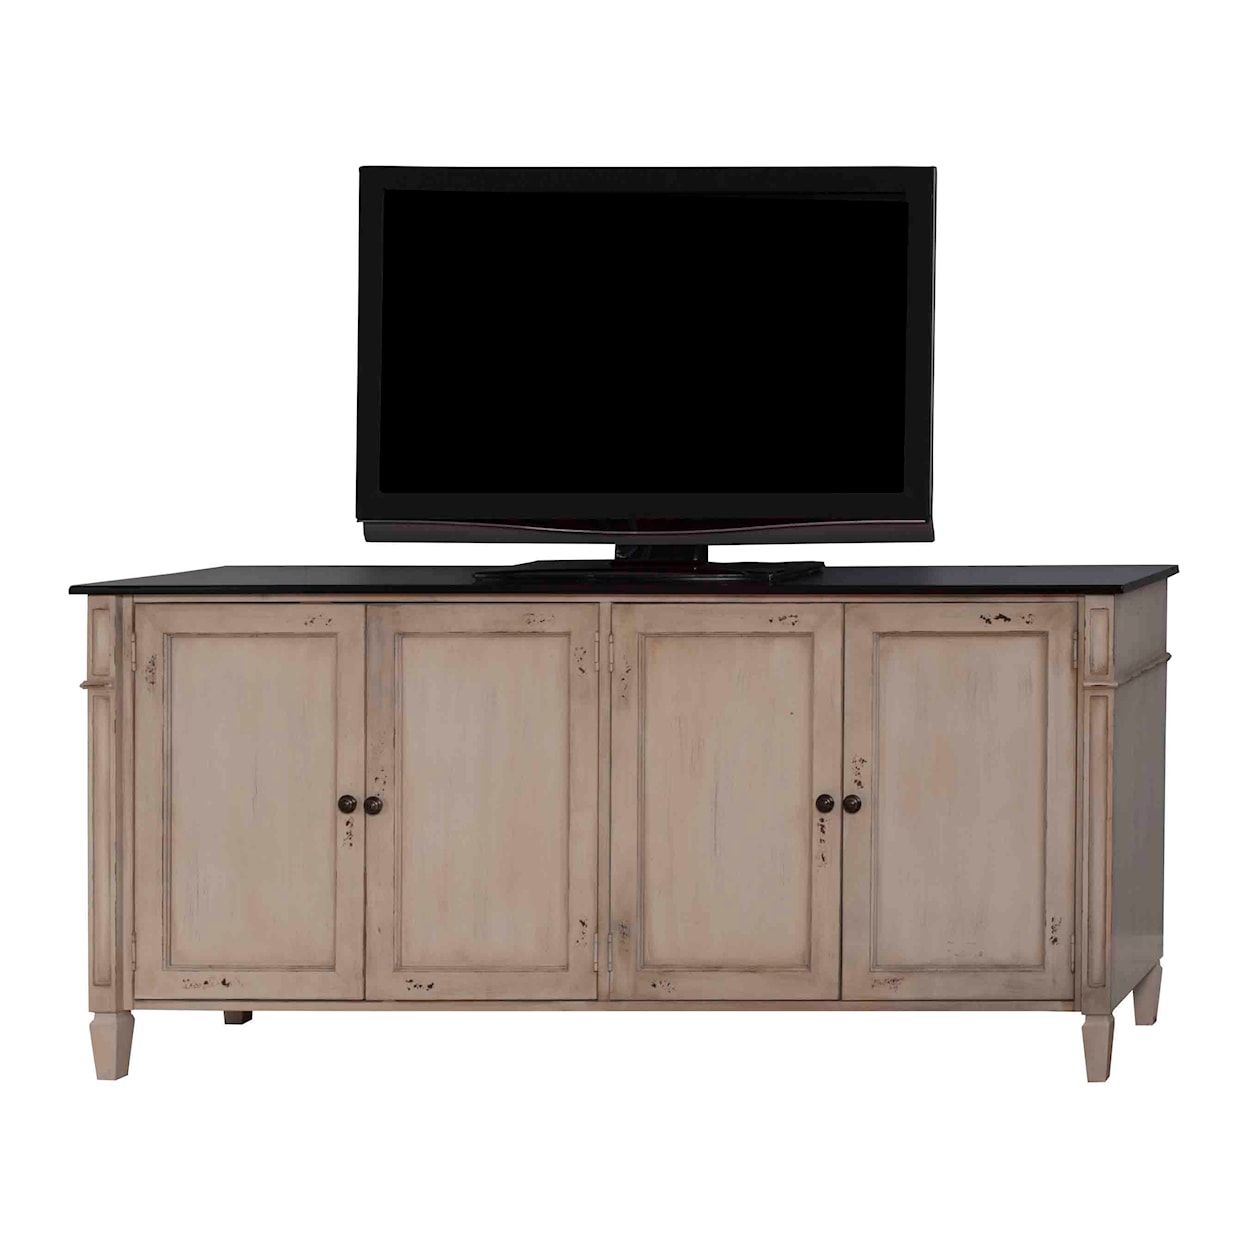 Martin Home Furnishings Eclectic Home Entertainment & Storage 72" TV Console